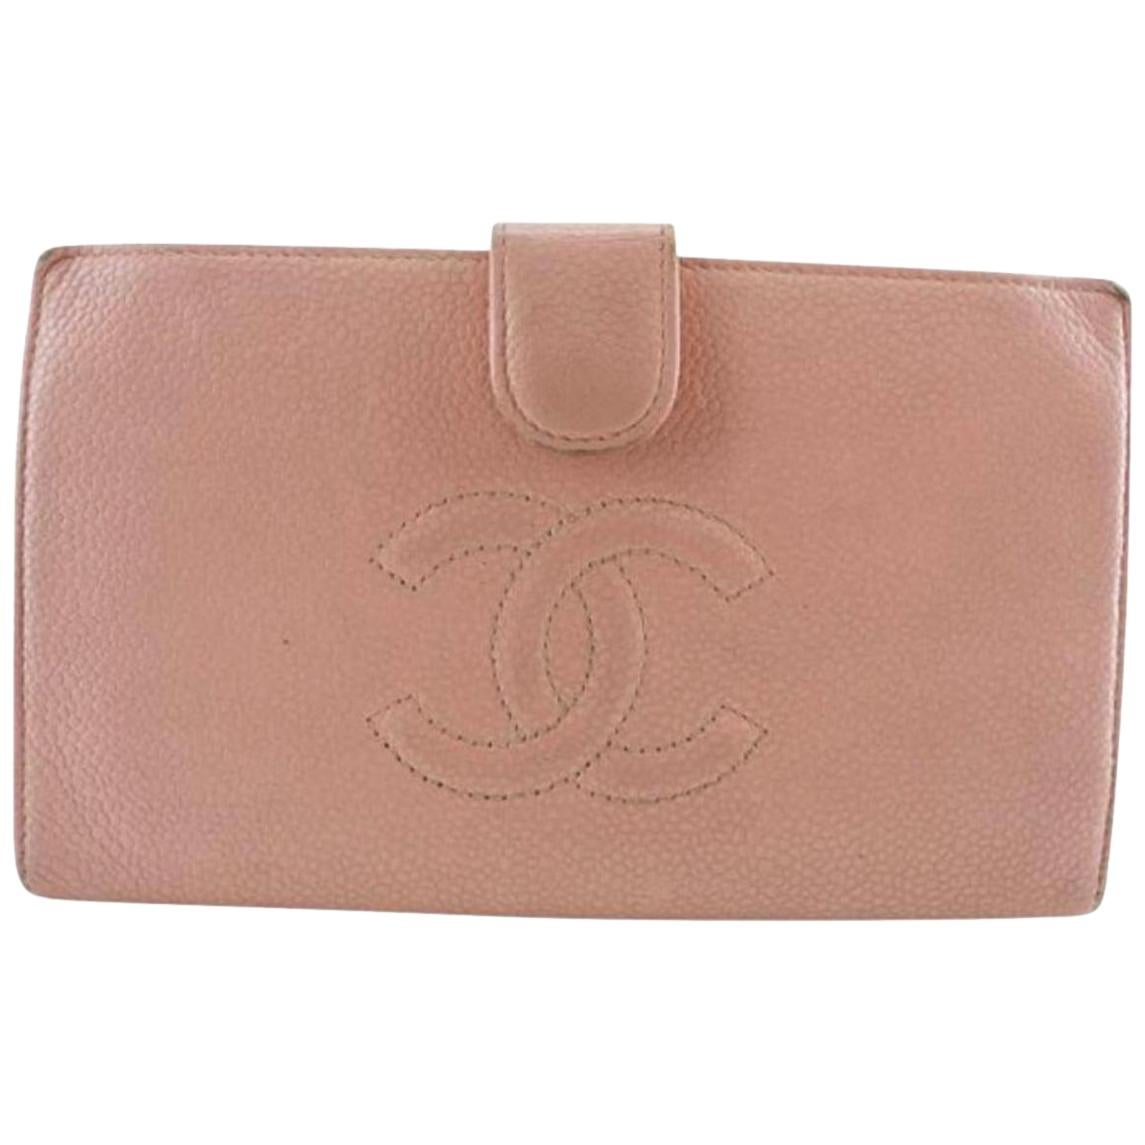 Chanel Pink Caviar Cc Bifold Long Classic 224368 Wallet For Sale